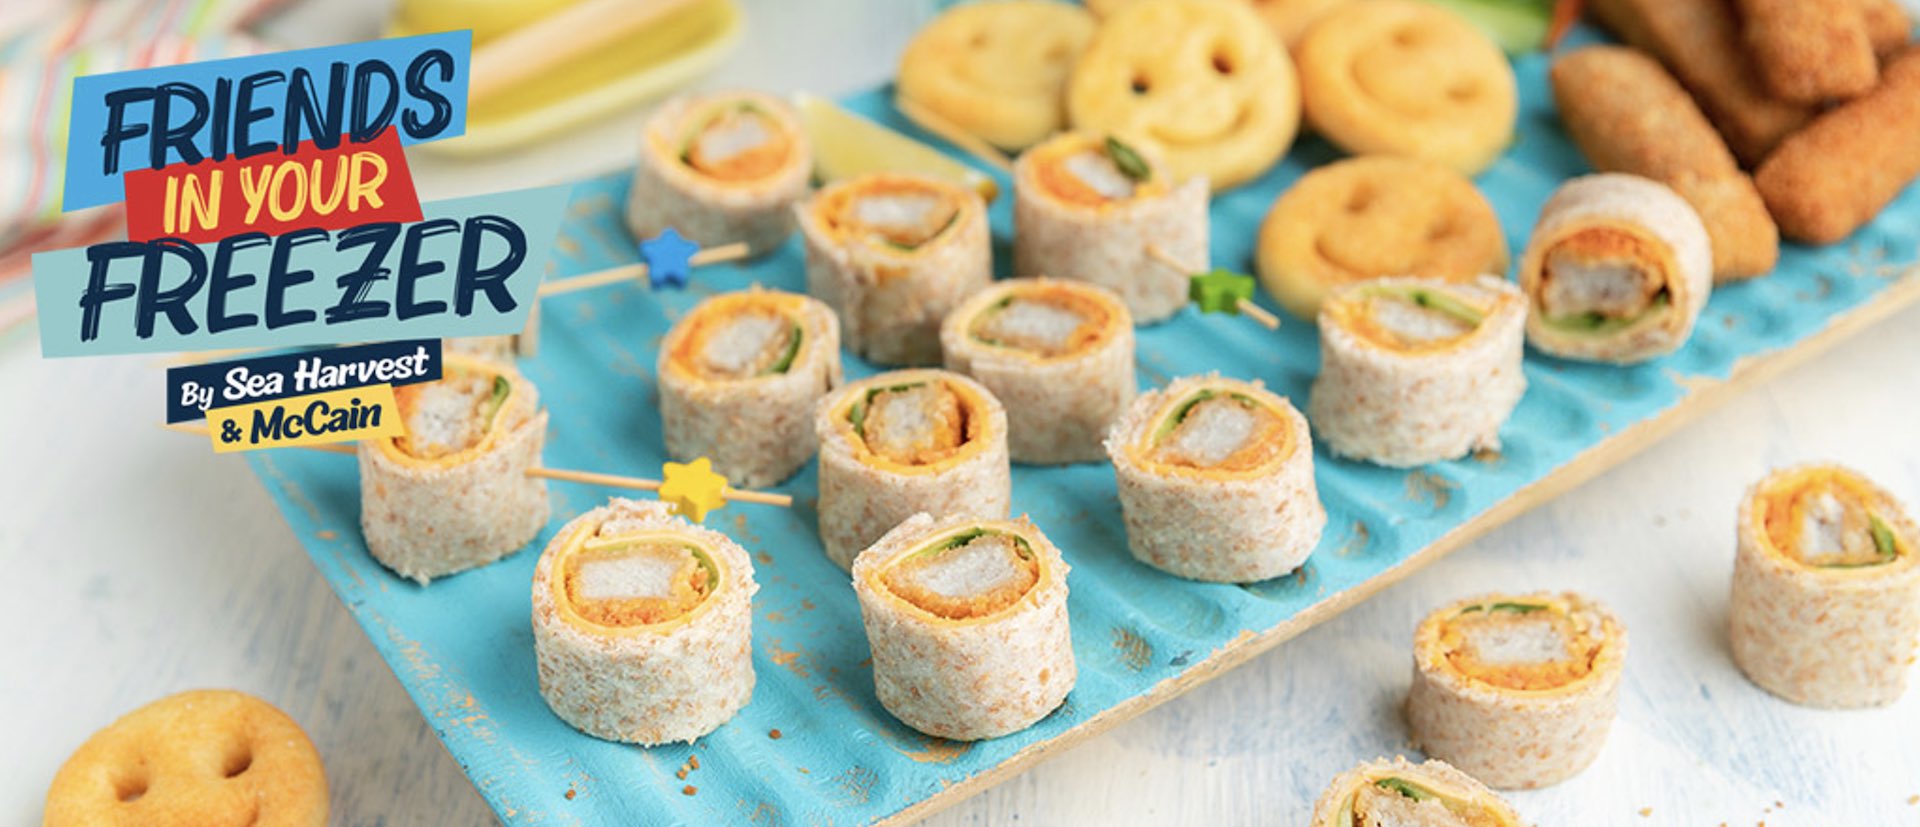 Fish Finger ‘Sushi’ With Smiles